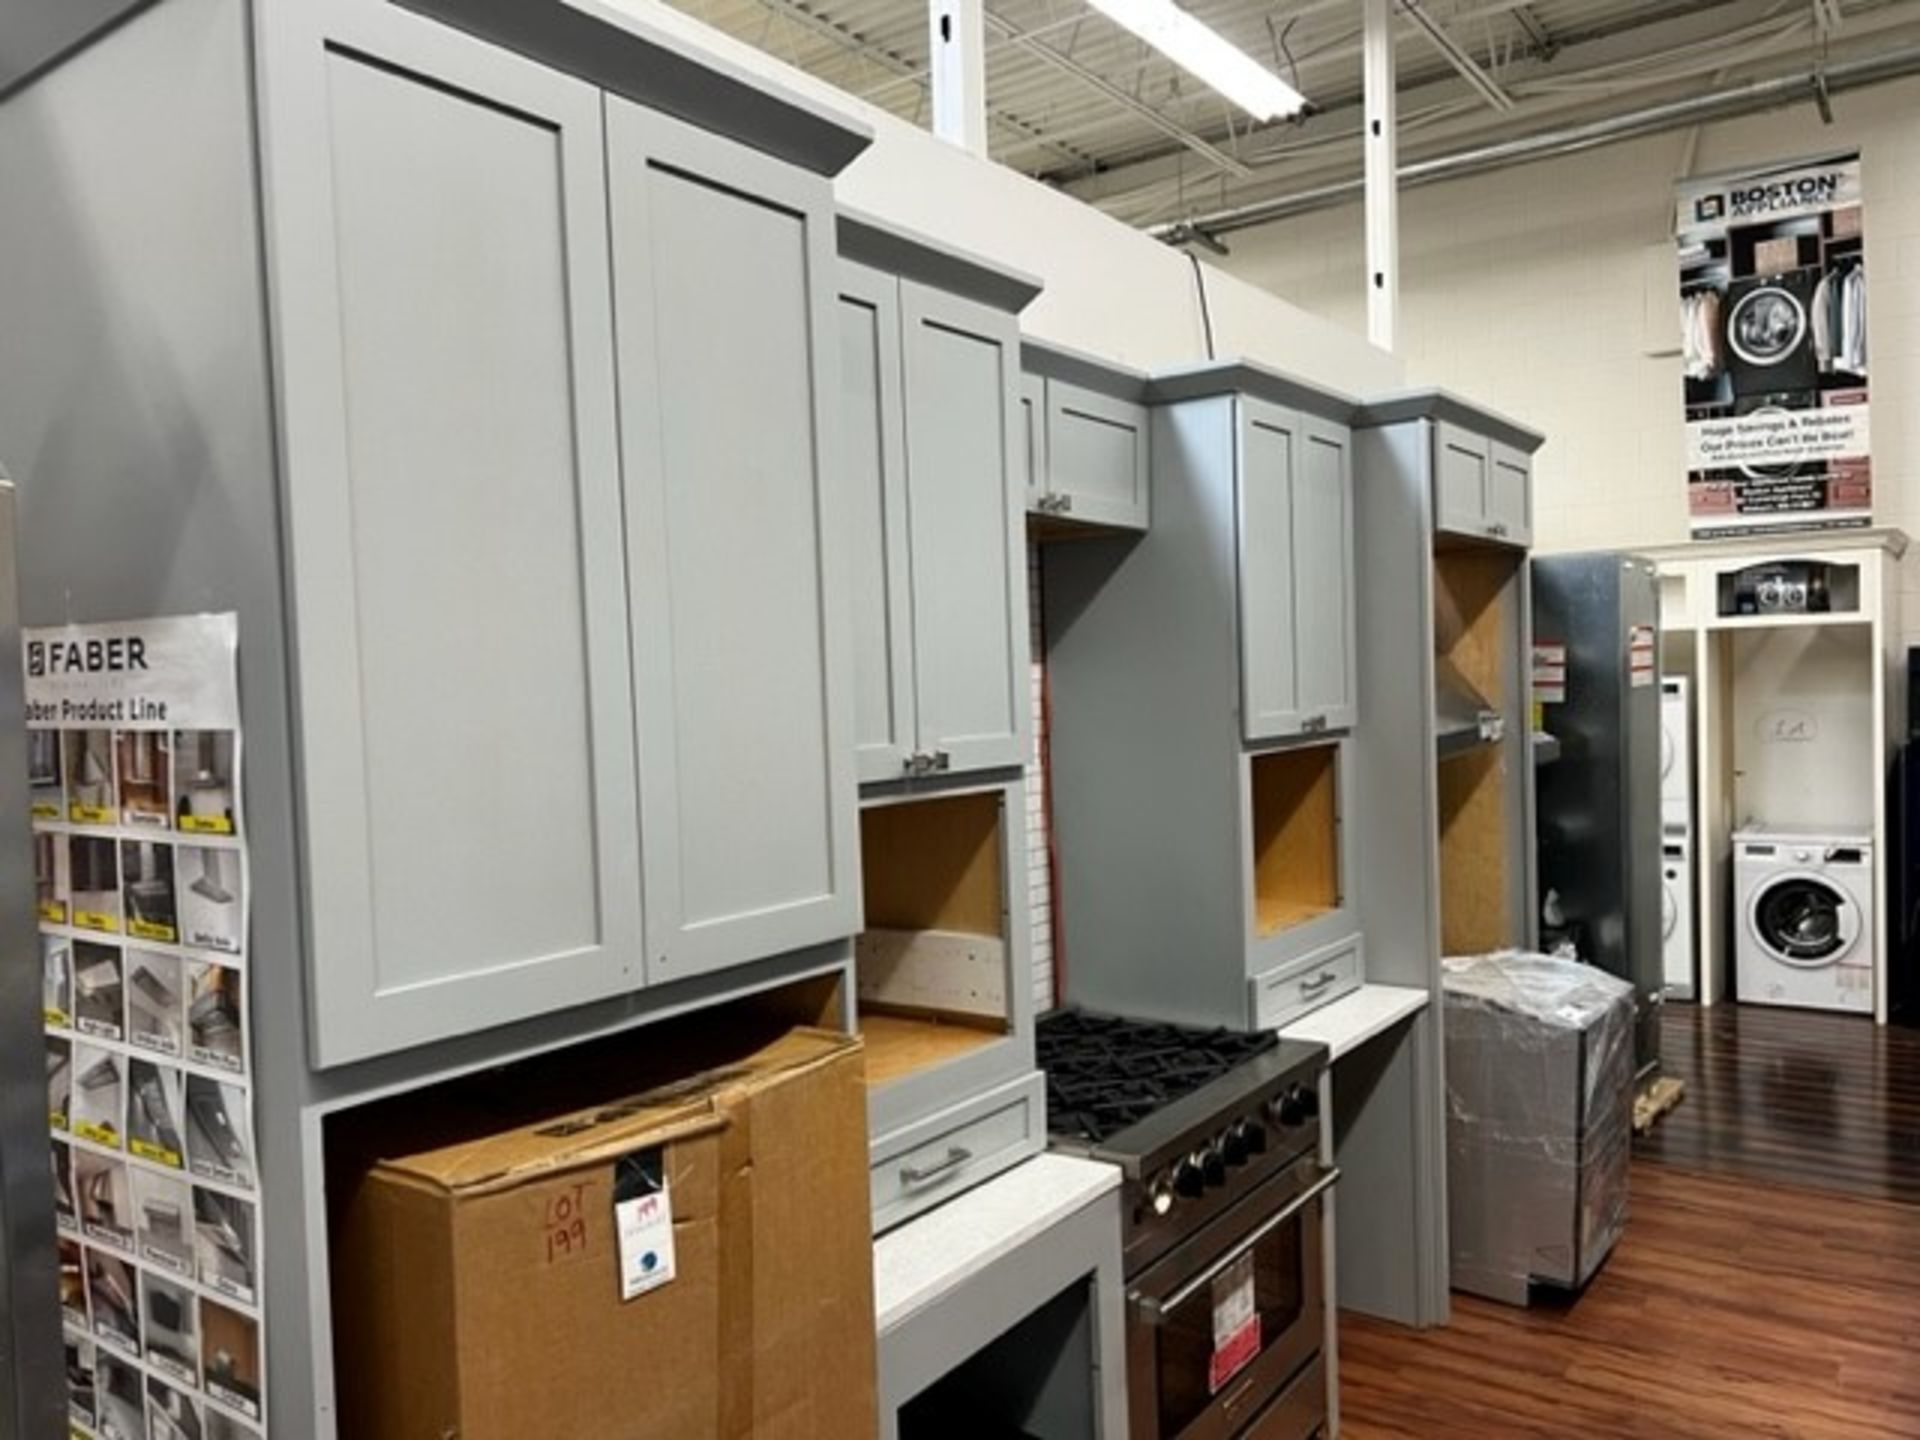 {LOT} Cabinets Pictured *THIS ITEM CANT BE REMOVED UNTIL MONDAY, DECEMBER 18 AND WILL BE BY APPOINT